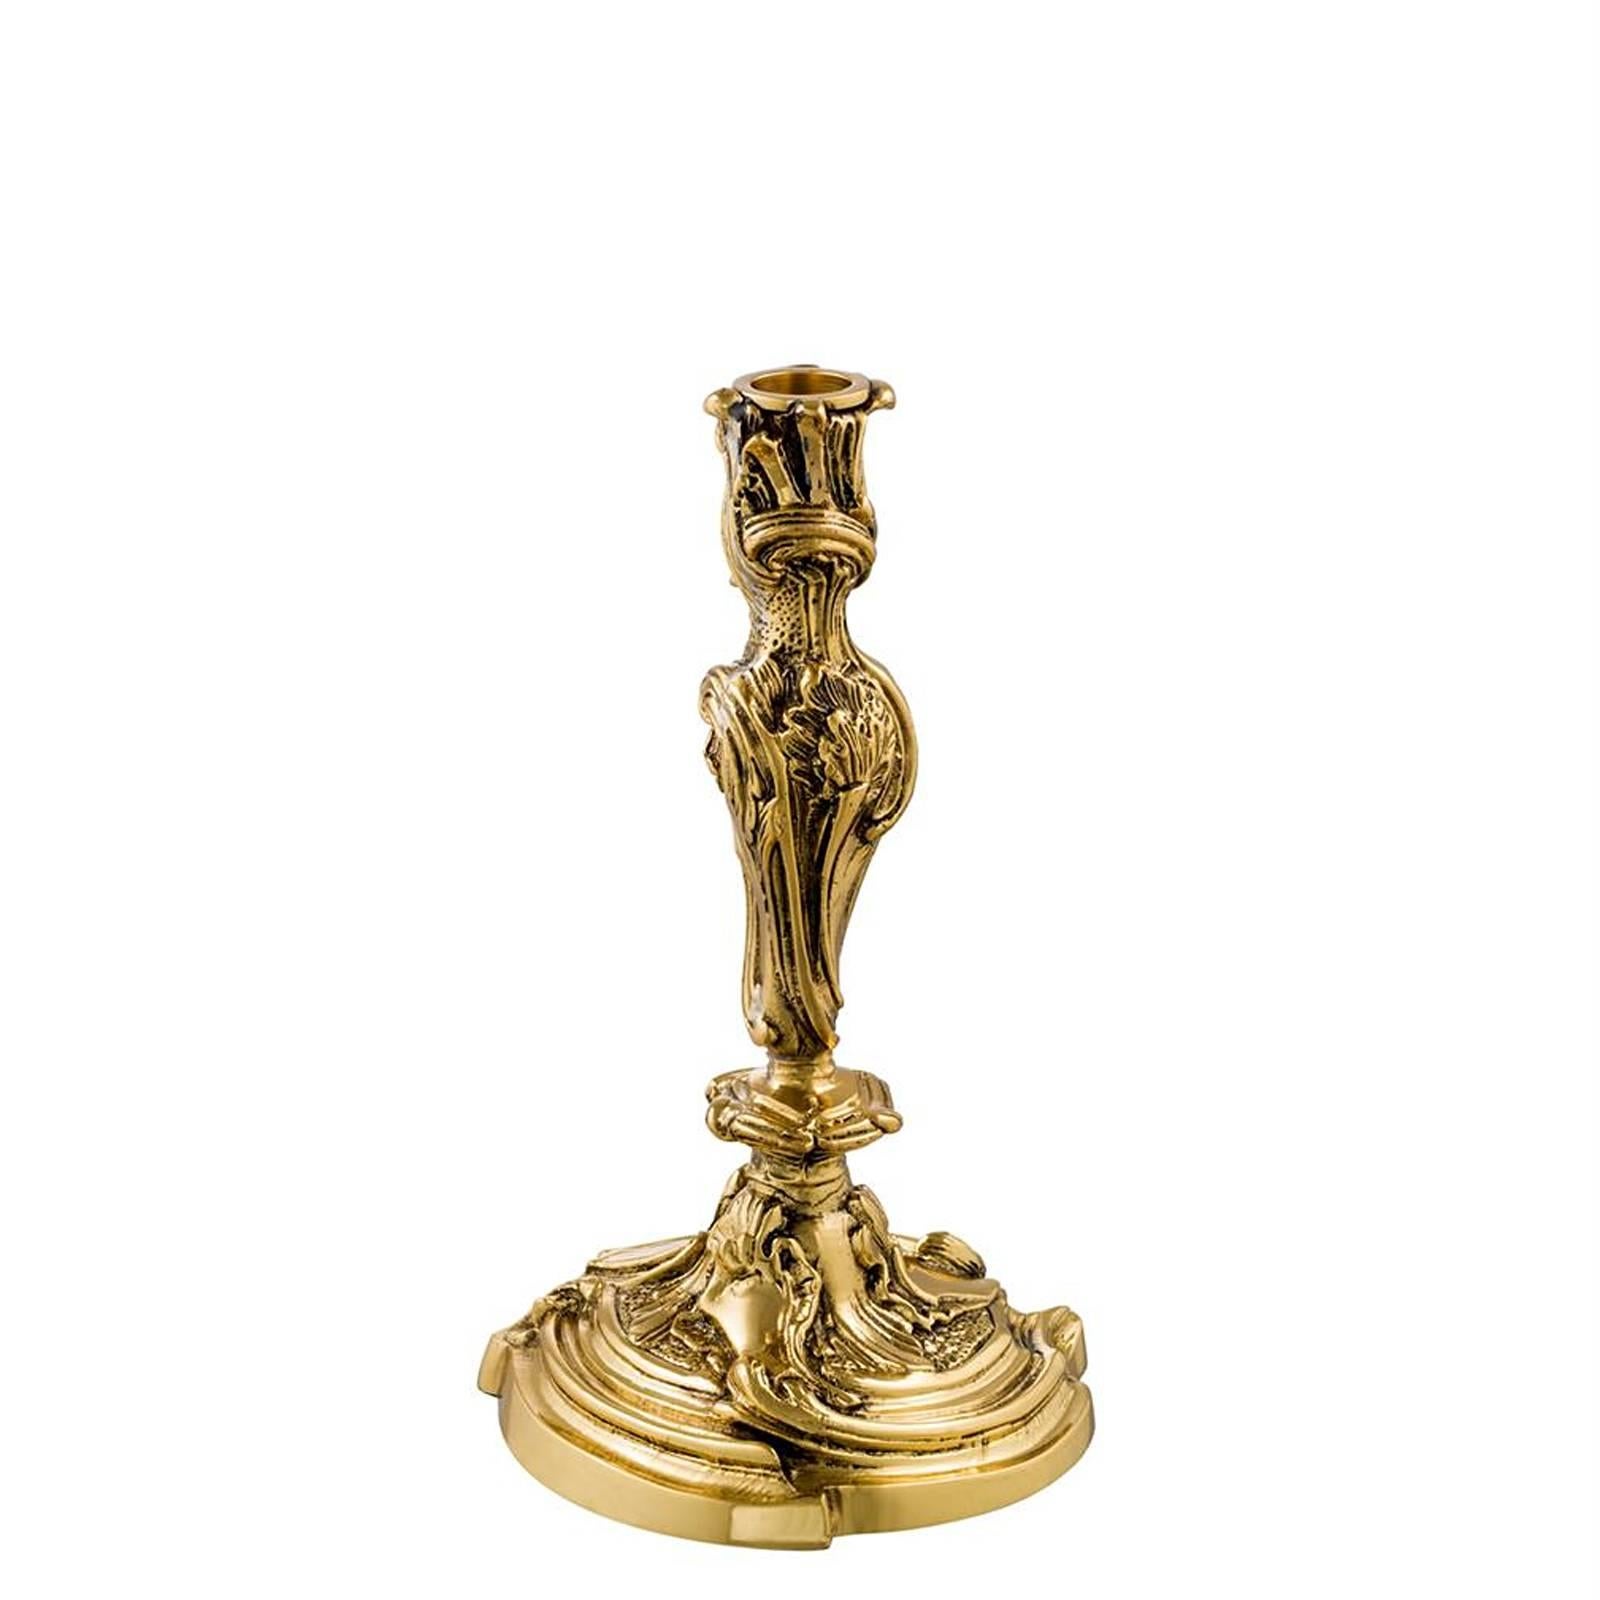 Candle holder Brazio in antique gold finish.
Also available in antique silver plated finish.
Candle not included.
